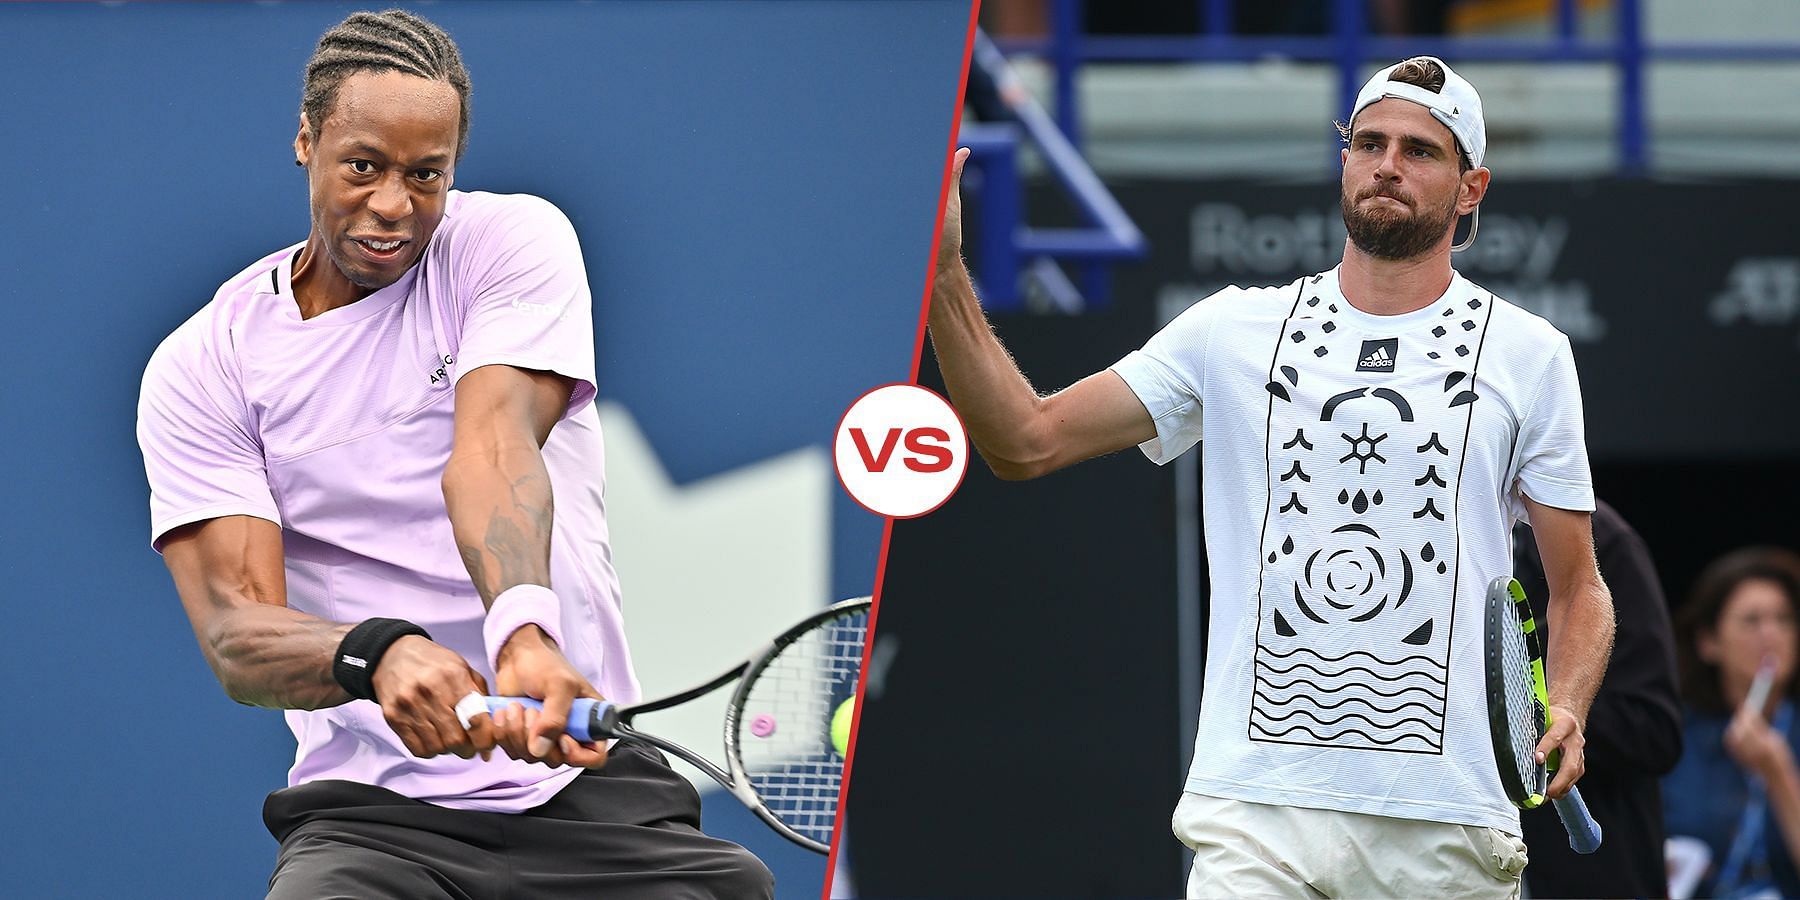 Gael Monfils vs Maxime Cressy preview, head-to-head &amp; prediction, ods and pick